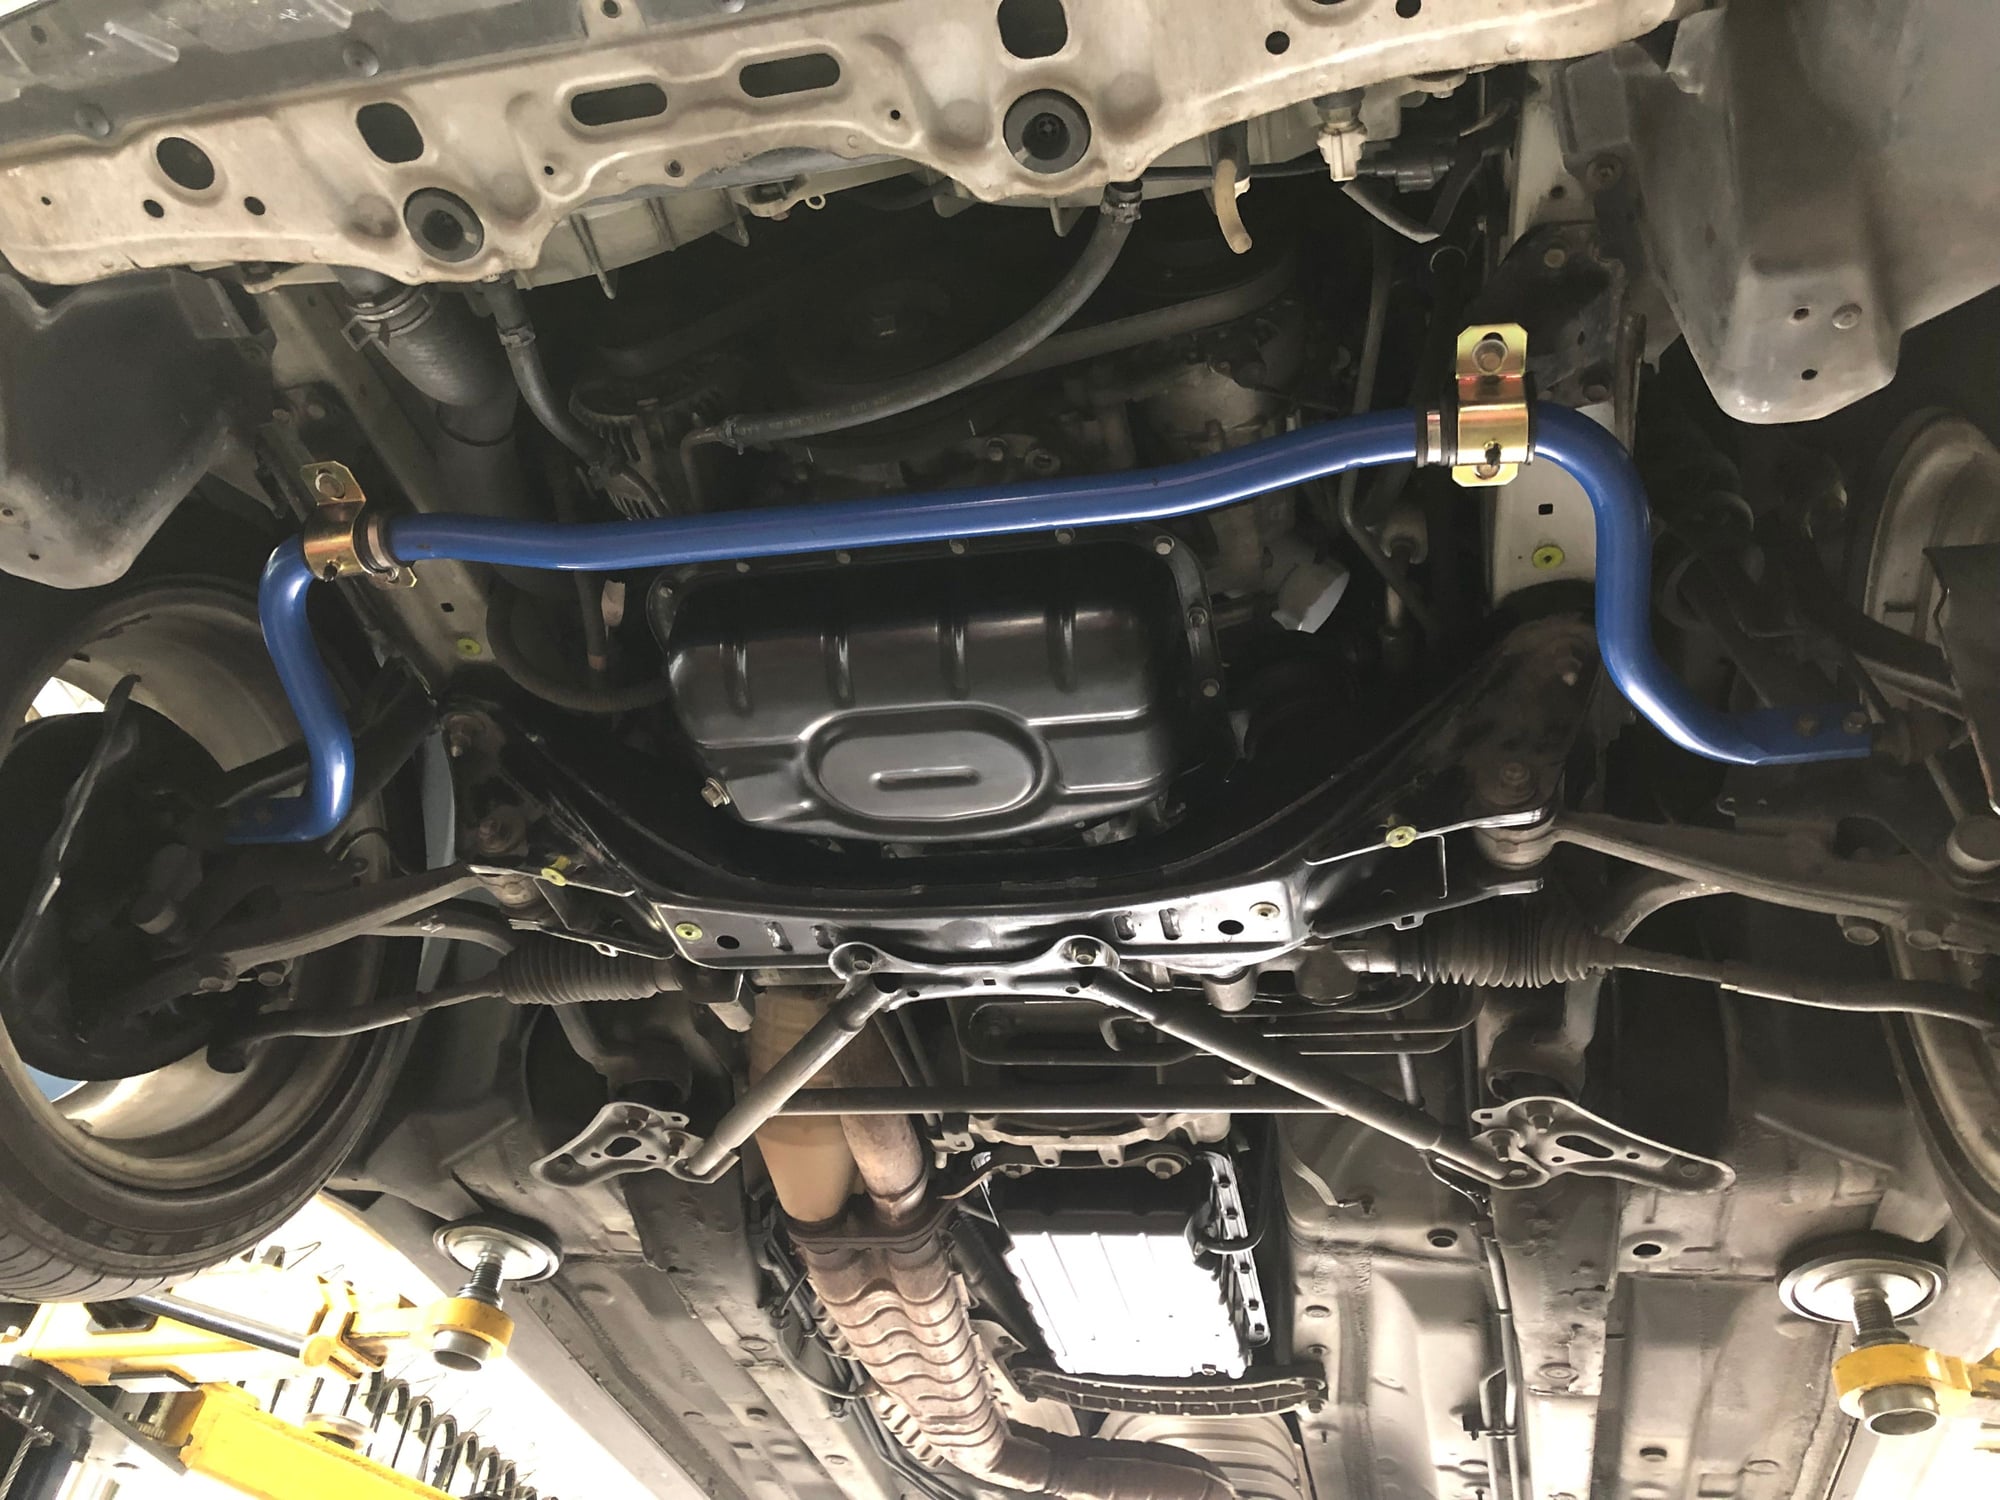 2002 GS300 NA-t getting started - ClubLexus - Lexus Forum Discussion